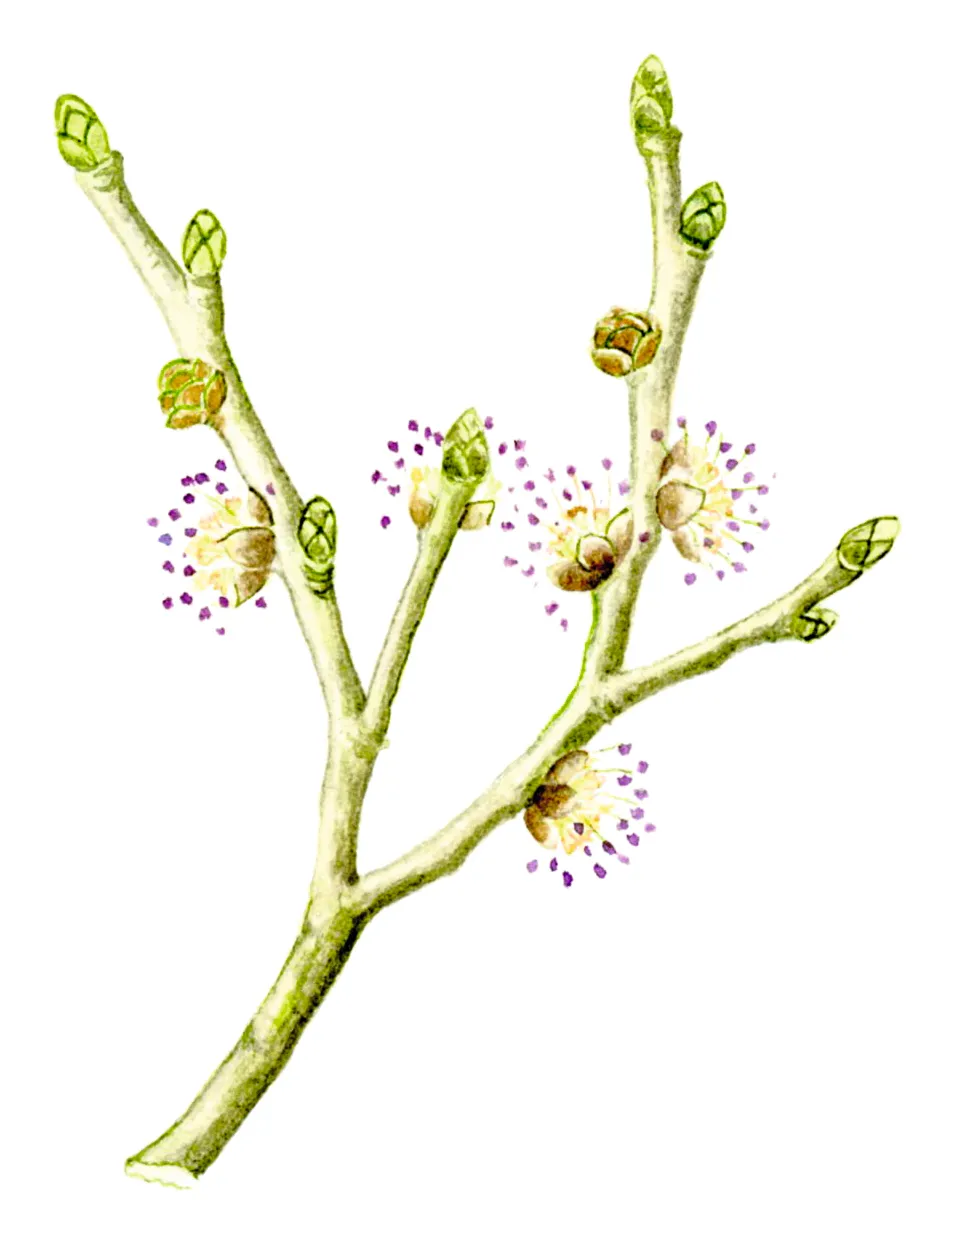 Illustration of wych elm blossom and leaves.